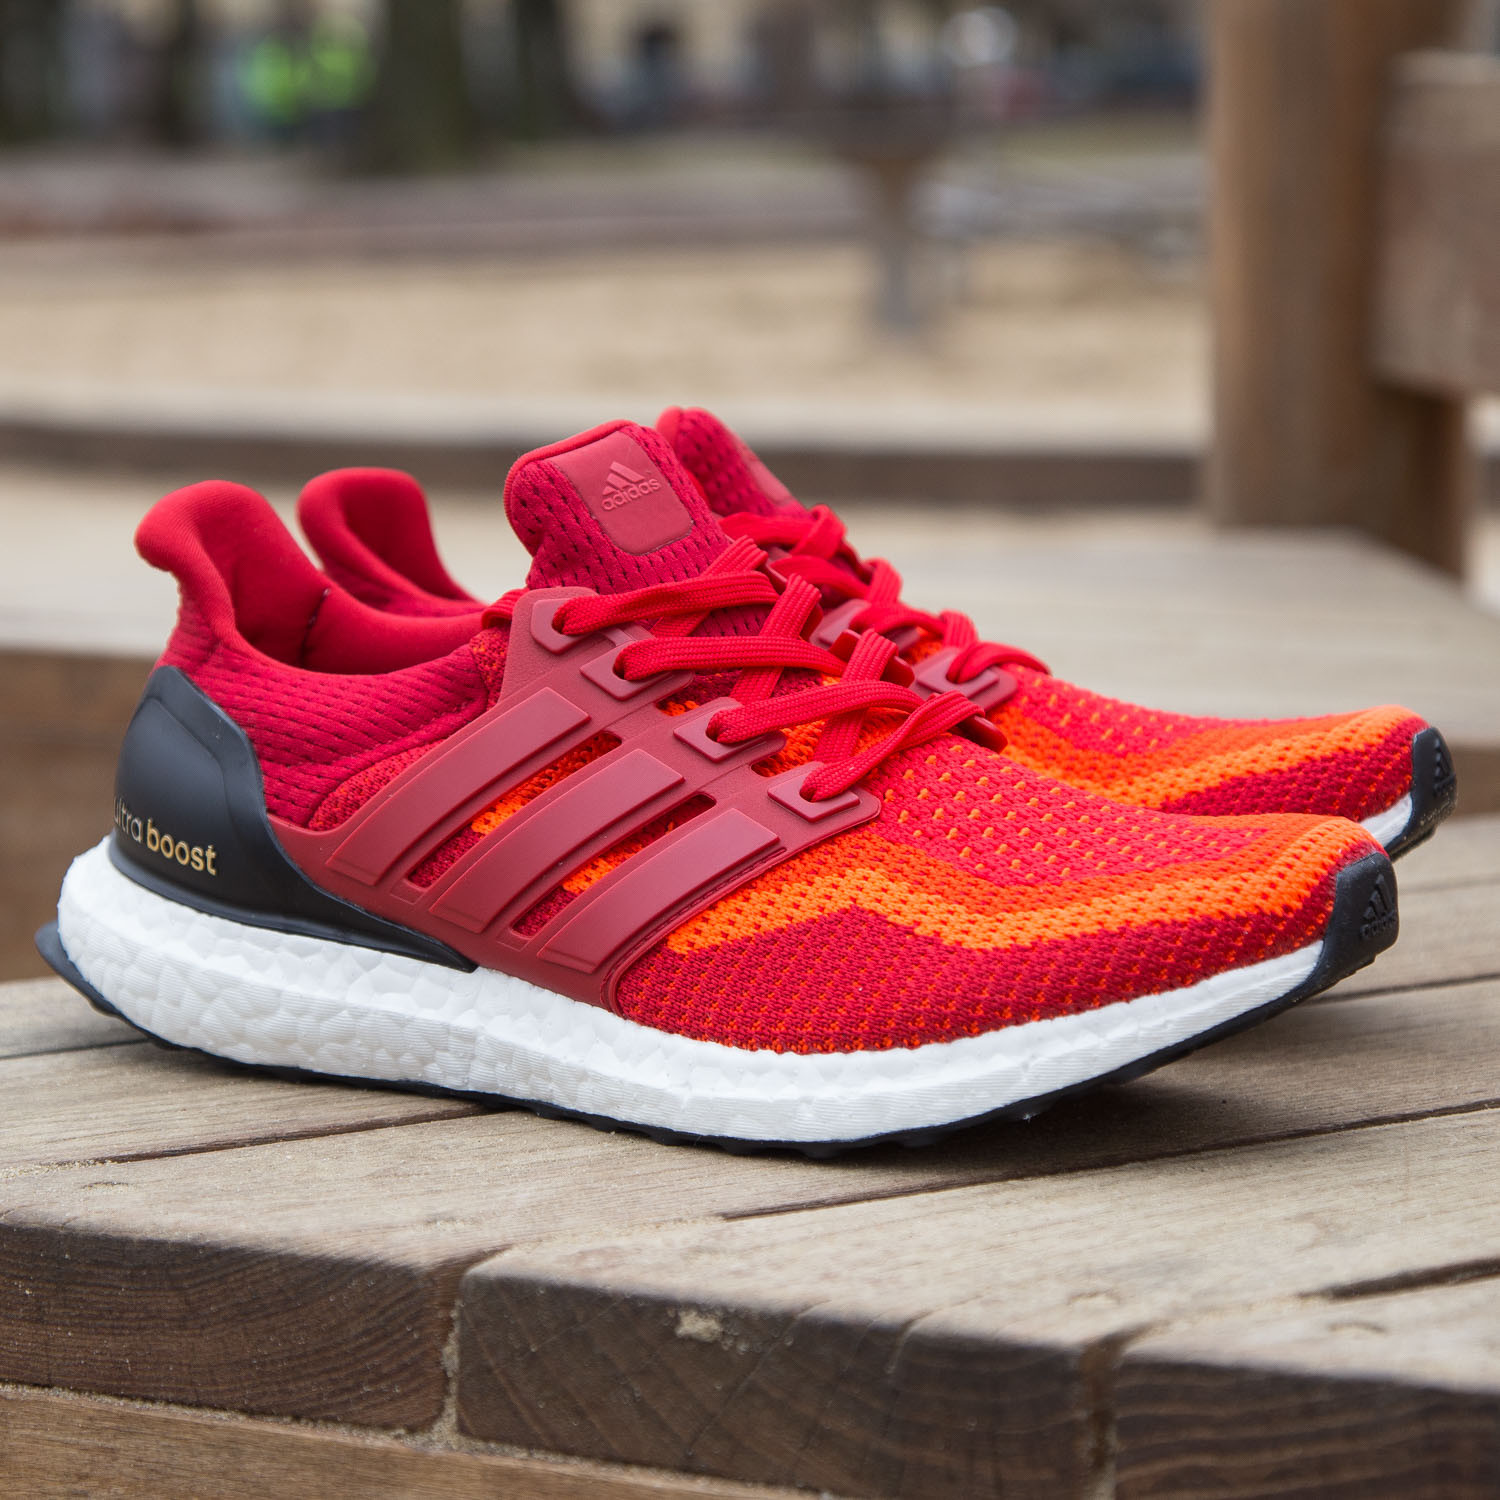 adidas ultra boost 2.0 red